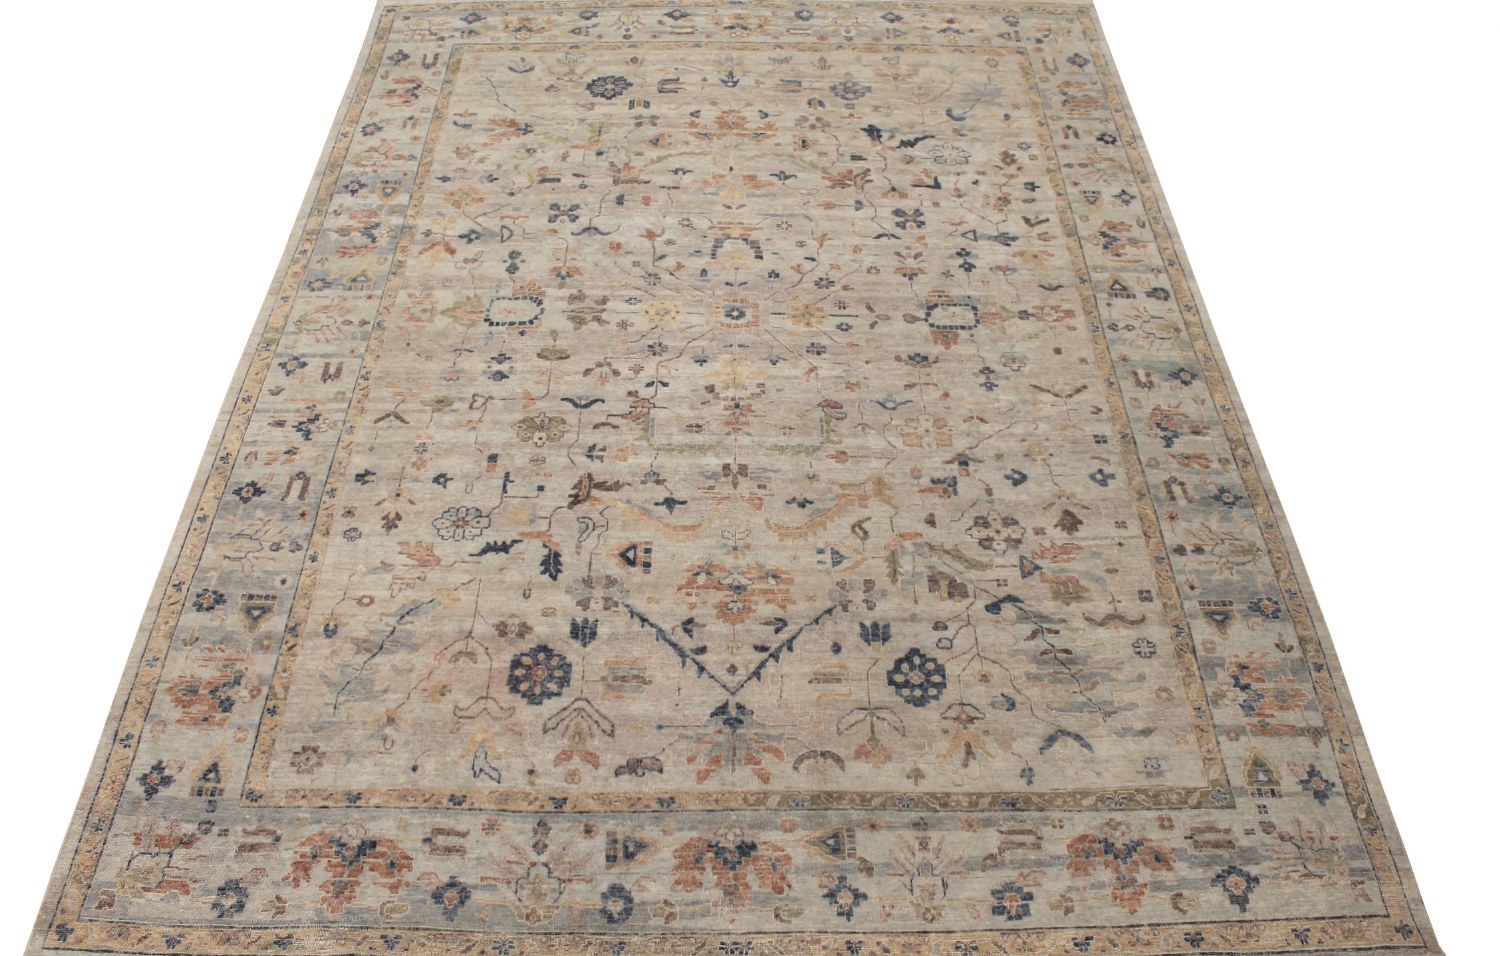 9x12 Aryana & Antique Revivals Hand Knotted Wool Area Rug - MR028542